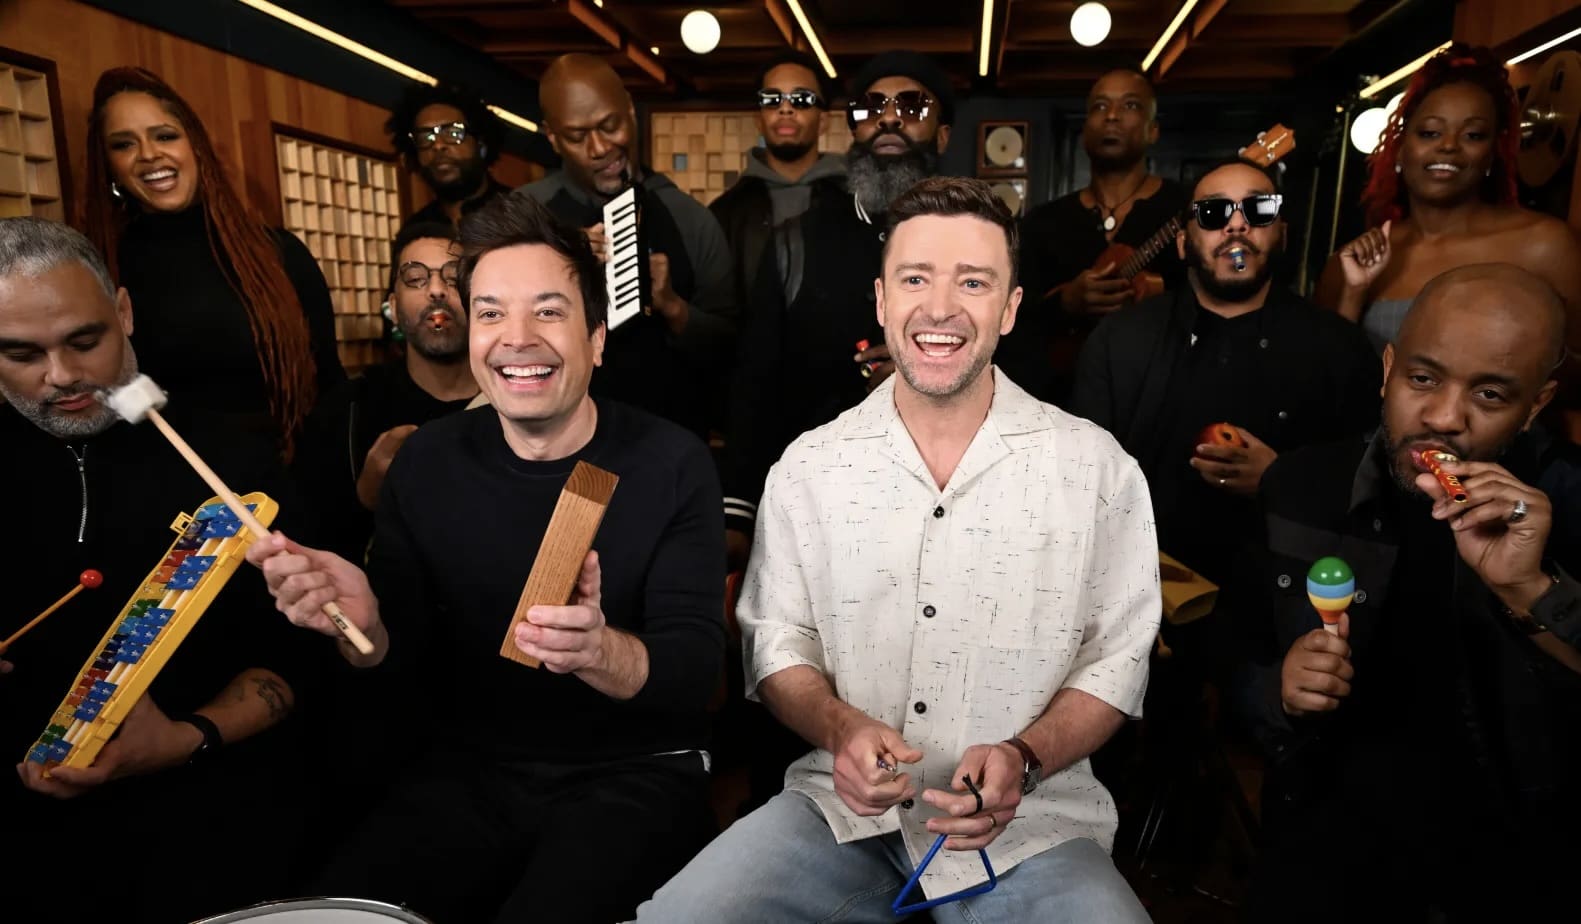 Justin Timberlake Announces World Tour, Performs With Classroom Instruments on ‘Fallon’ [Video]